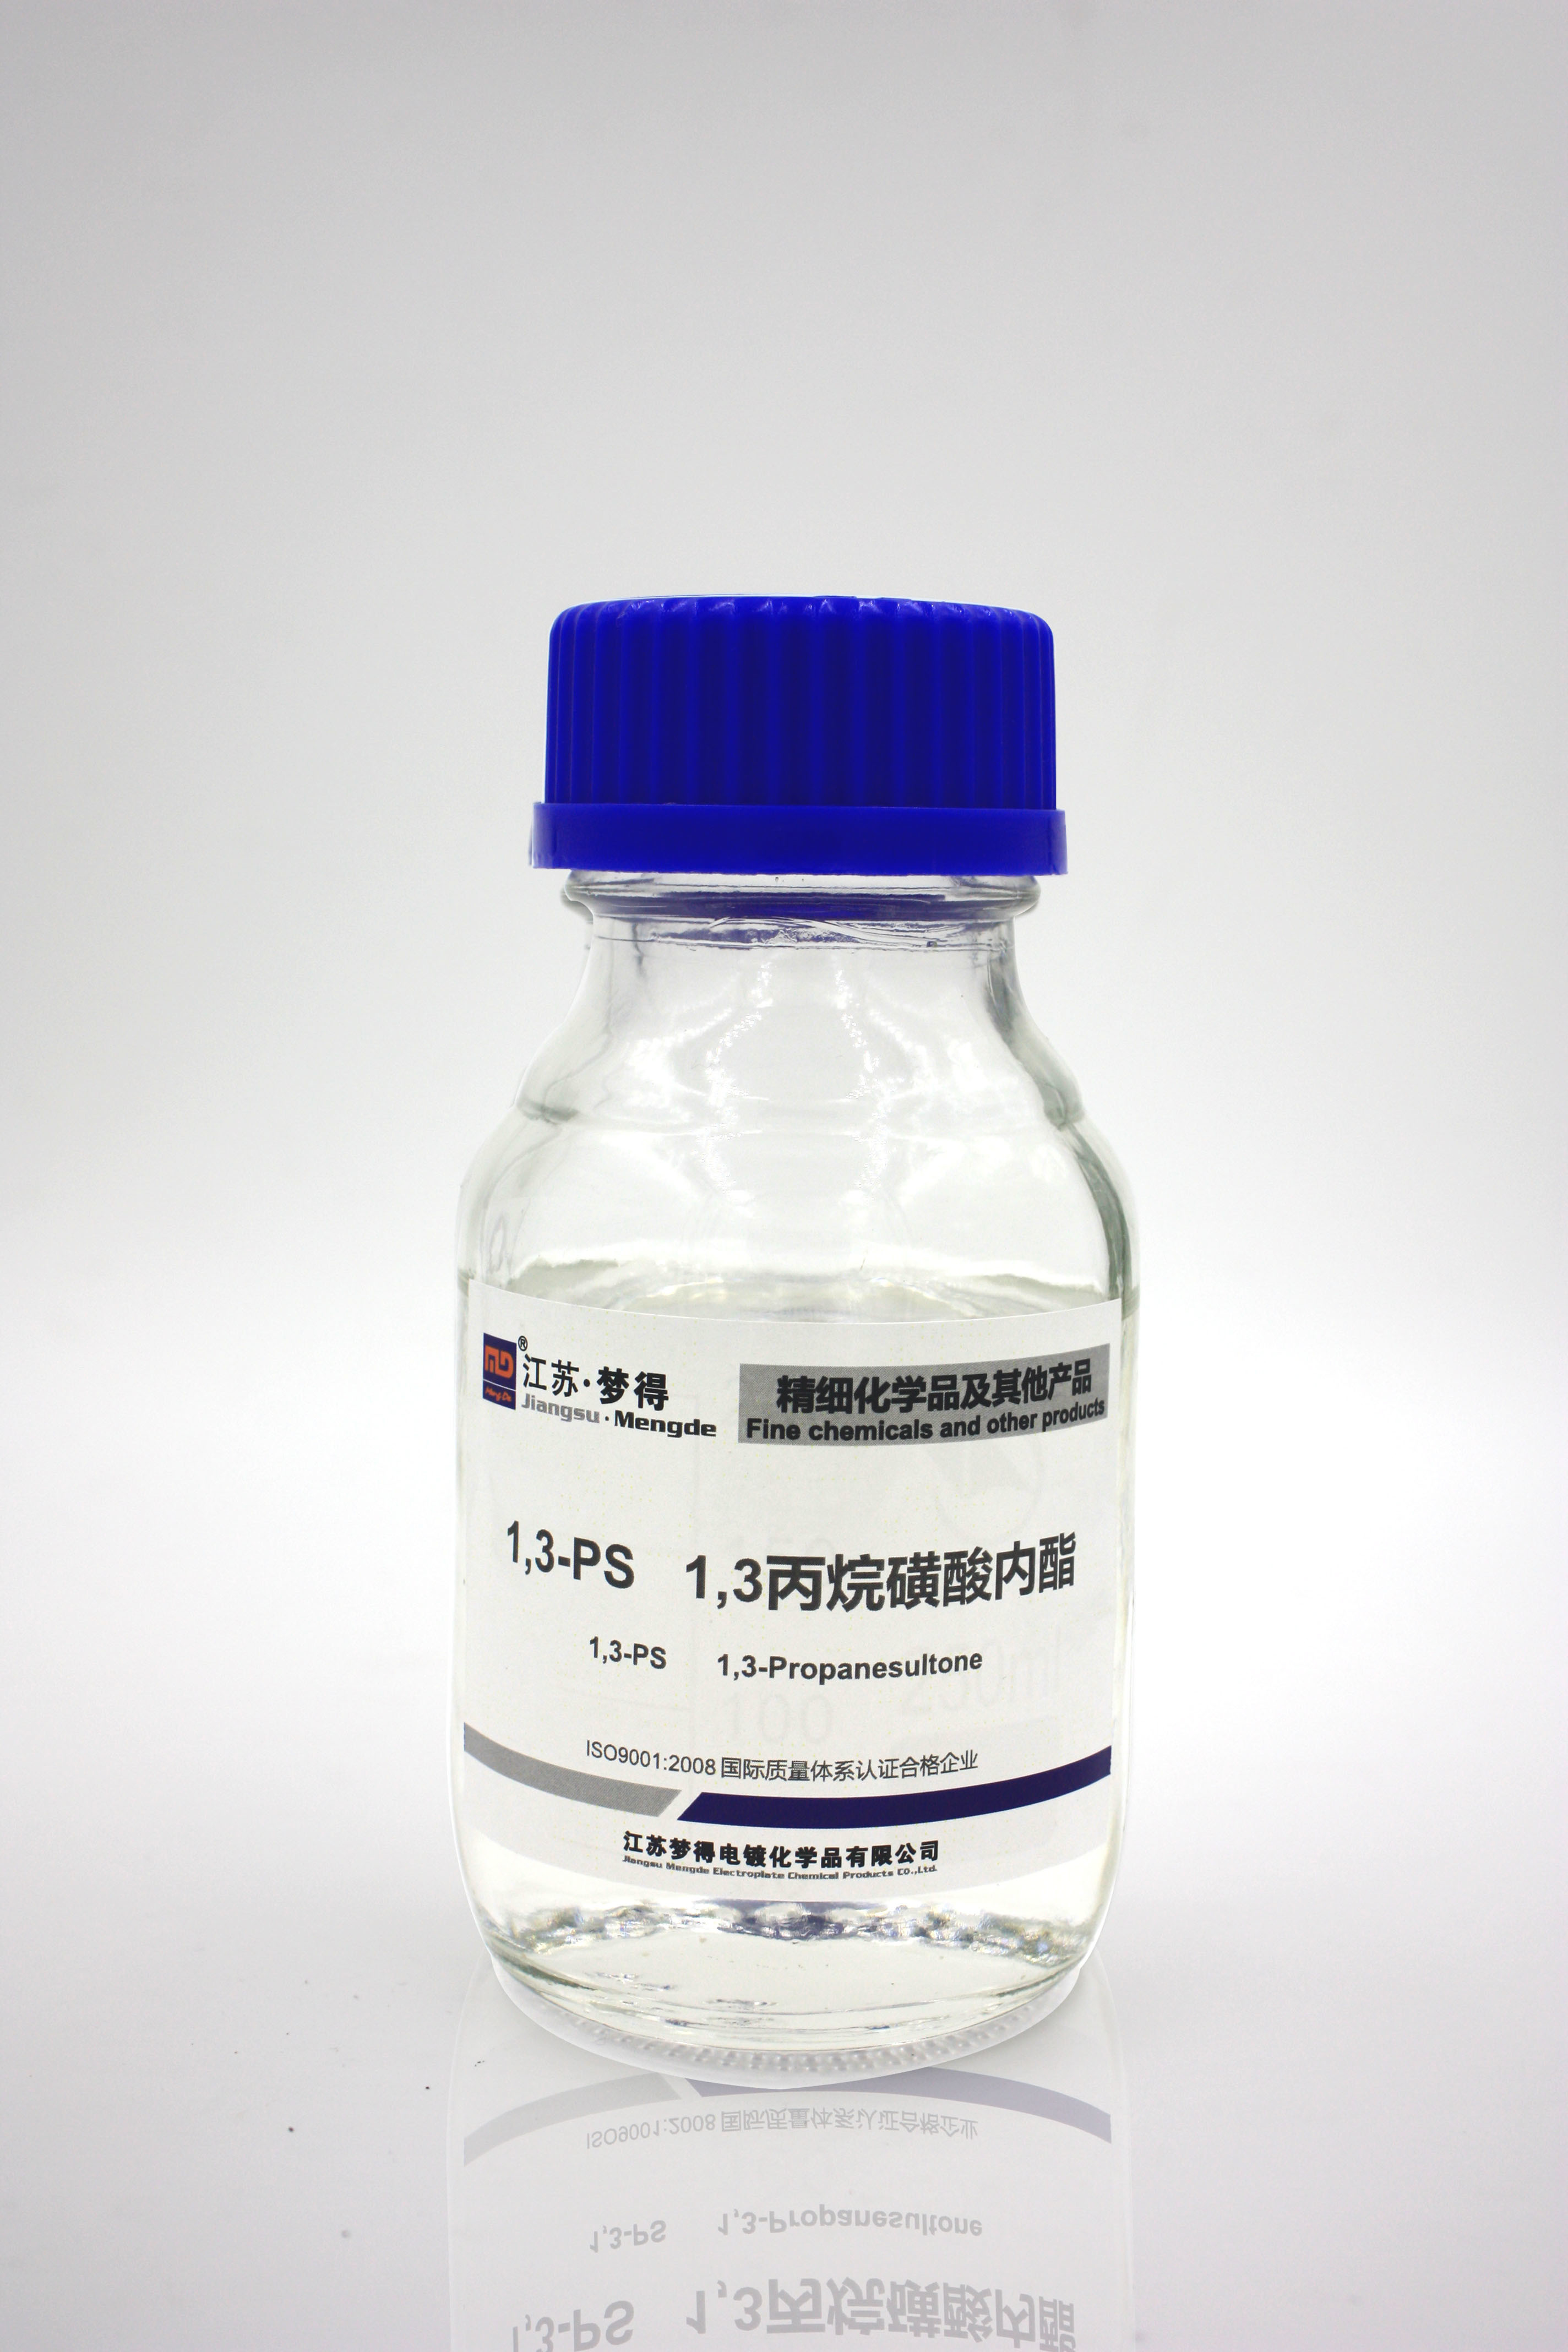 Best 1,3-PS, 1,3-propanesultone, additive in lithium battery electrolyte wholesale